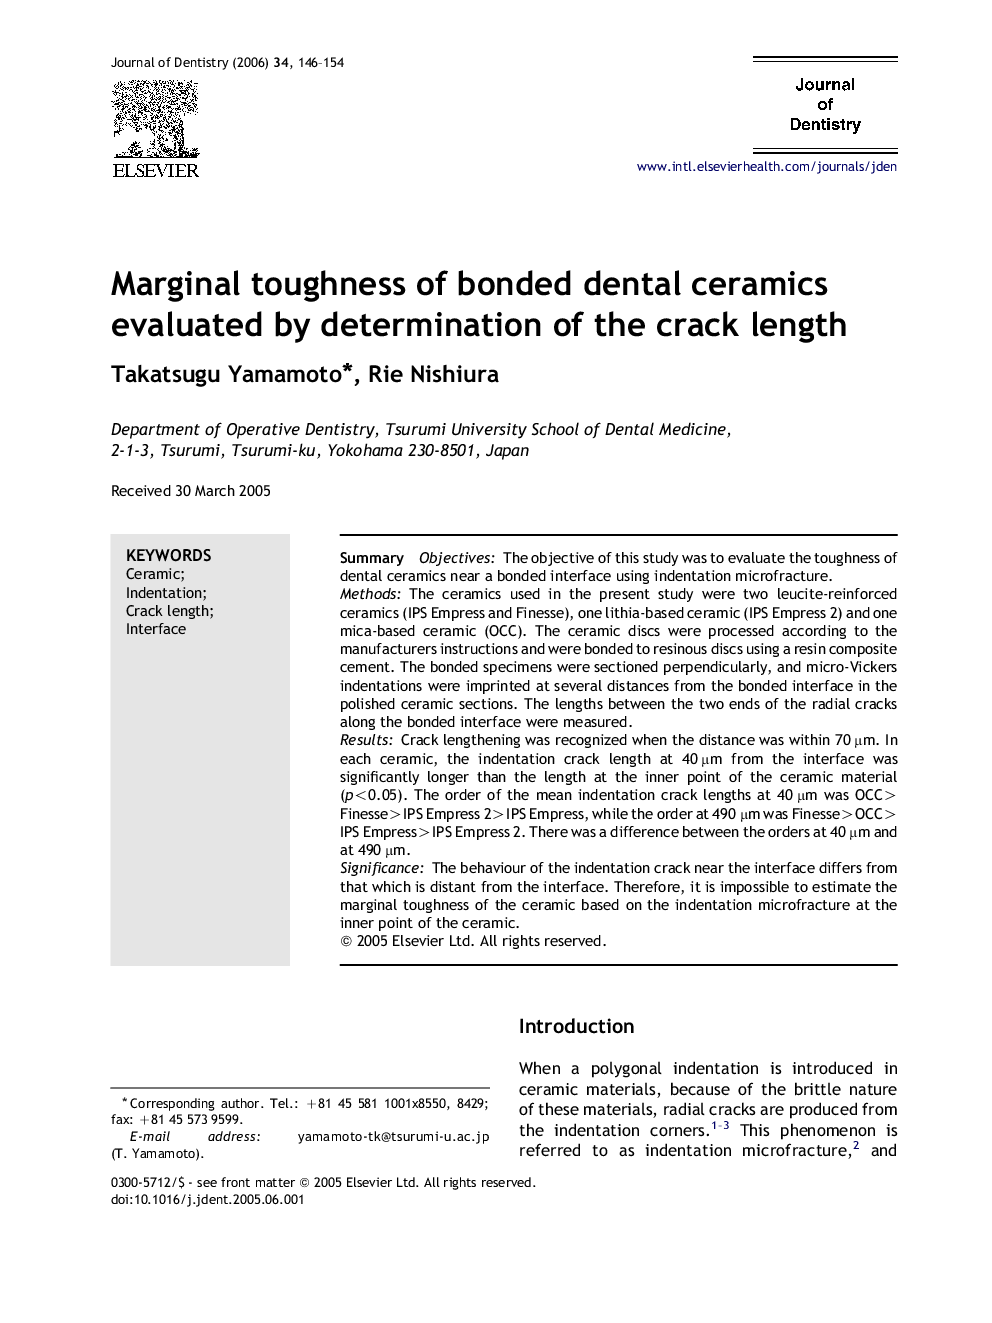 Marginal toughness of bonded dental ceramics evaluated by determination of the crack length